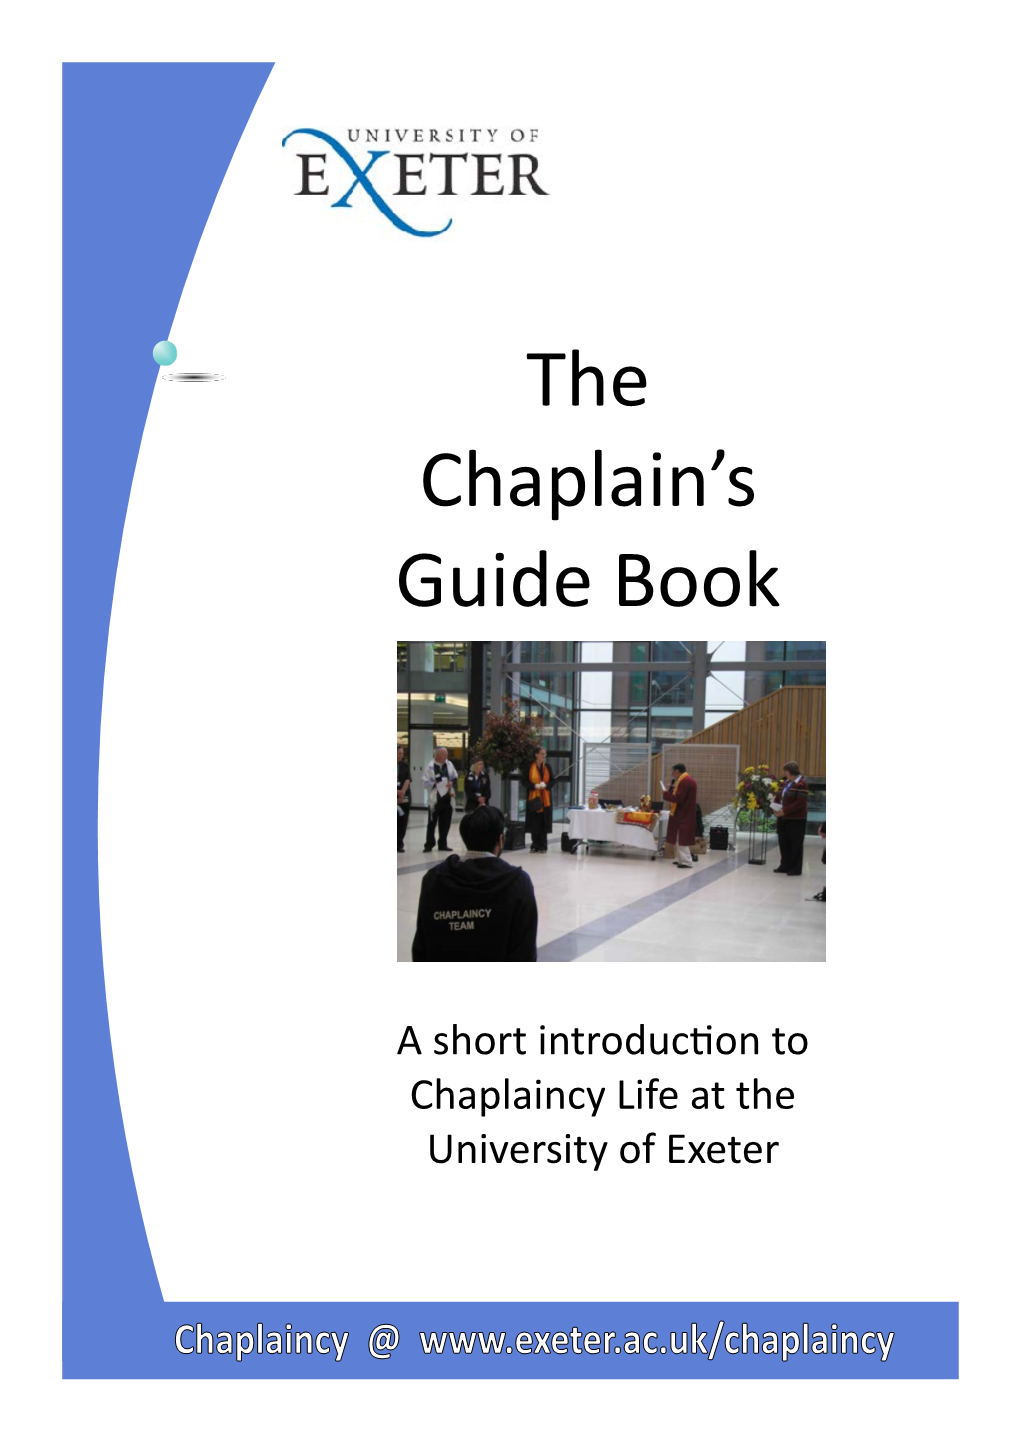 The Chaplain's Guide Book